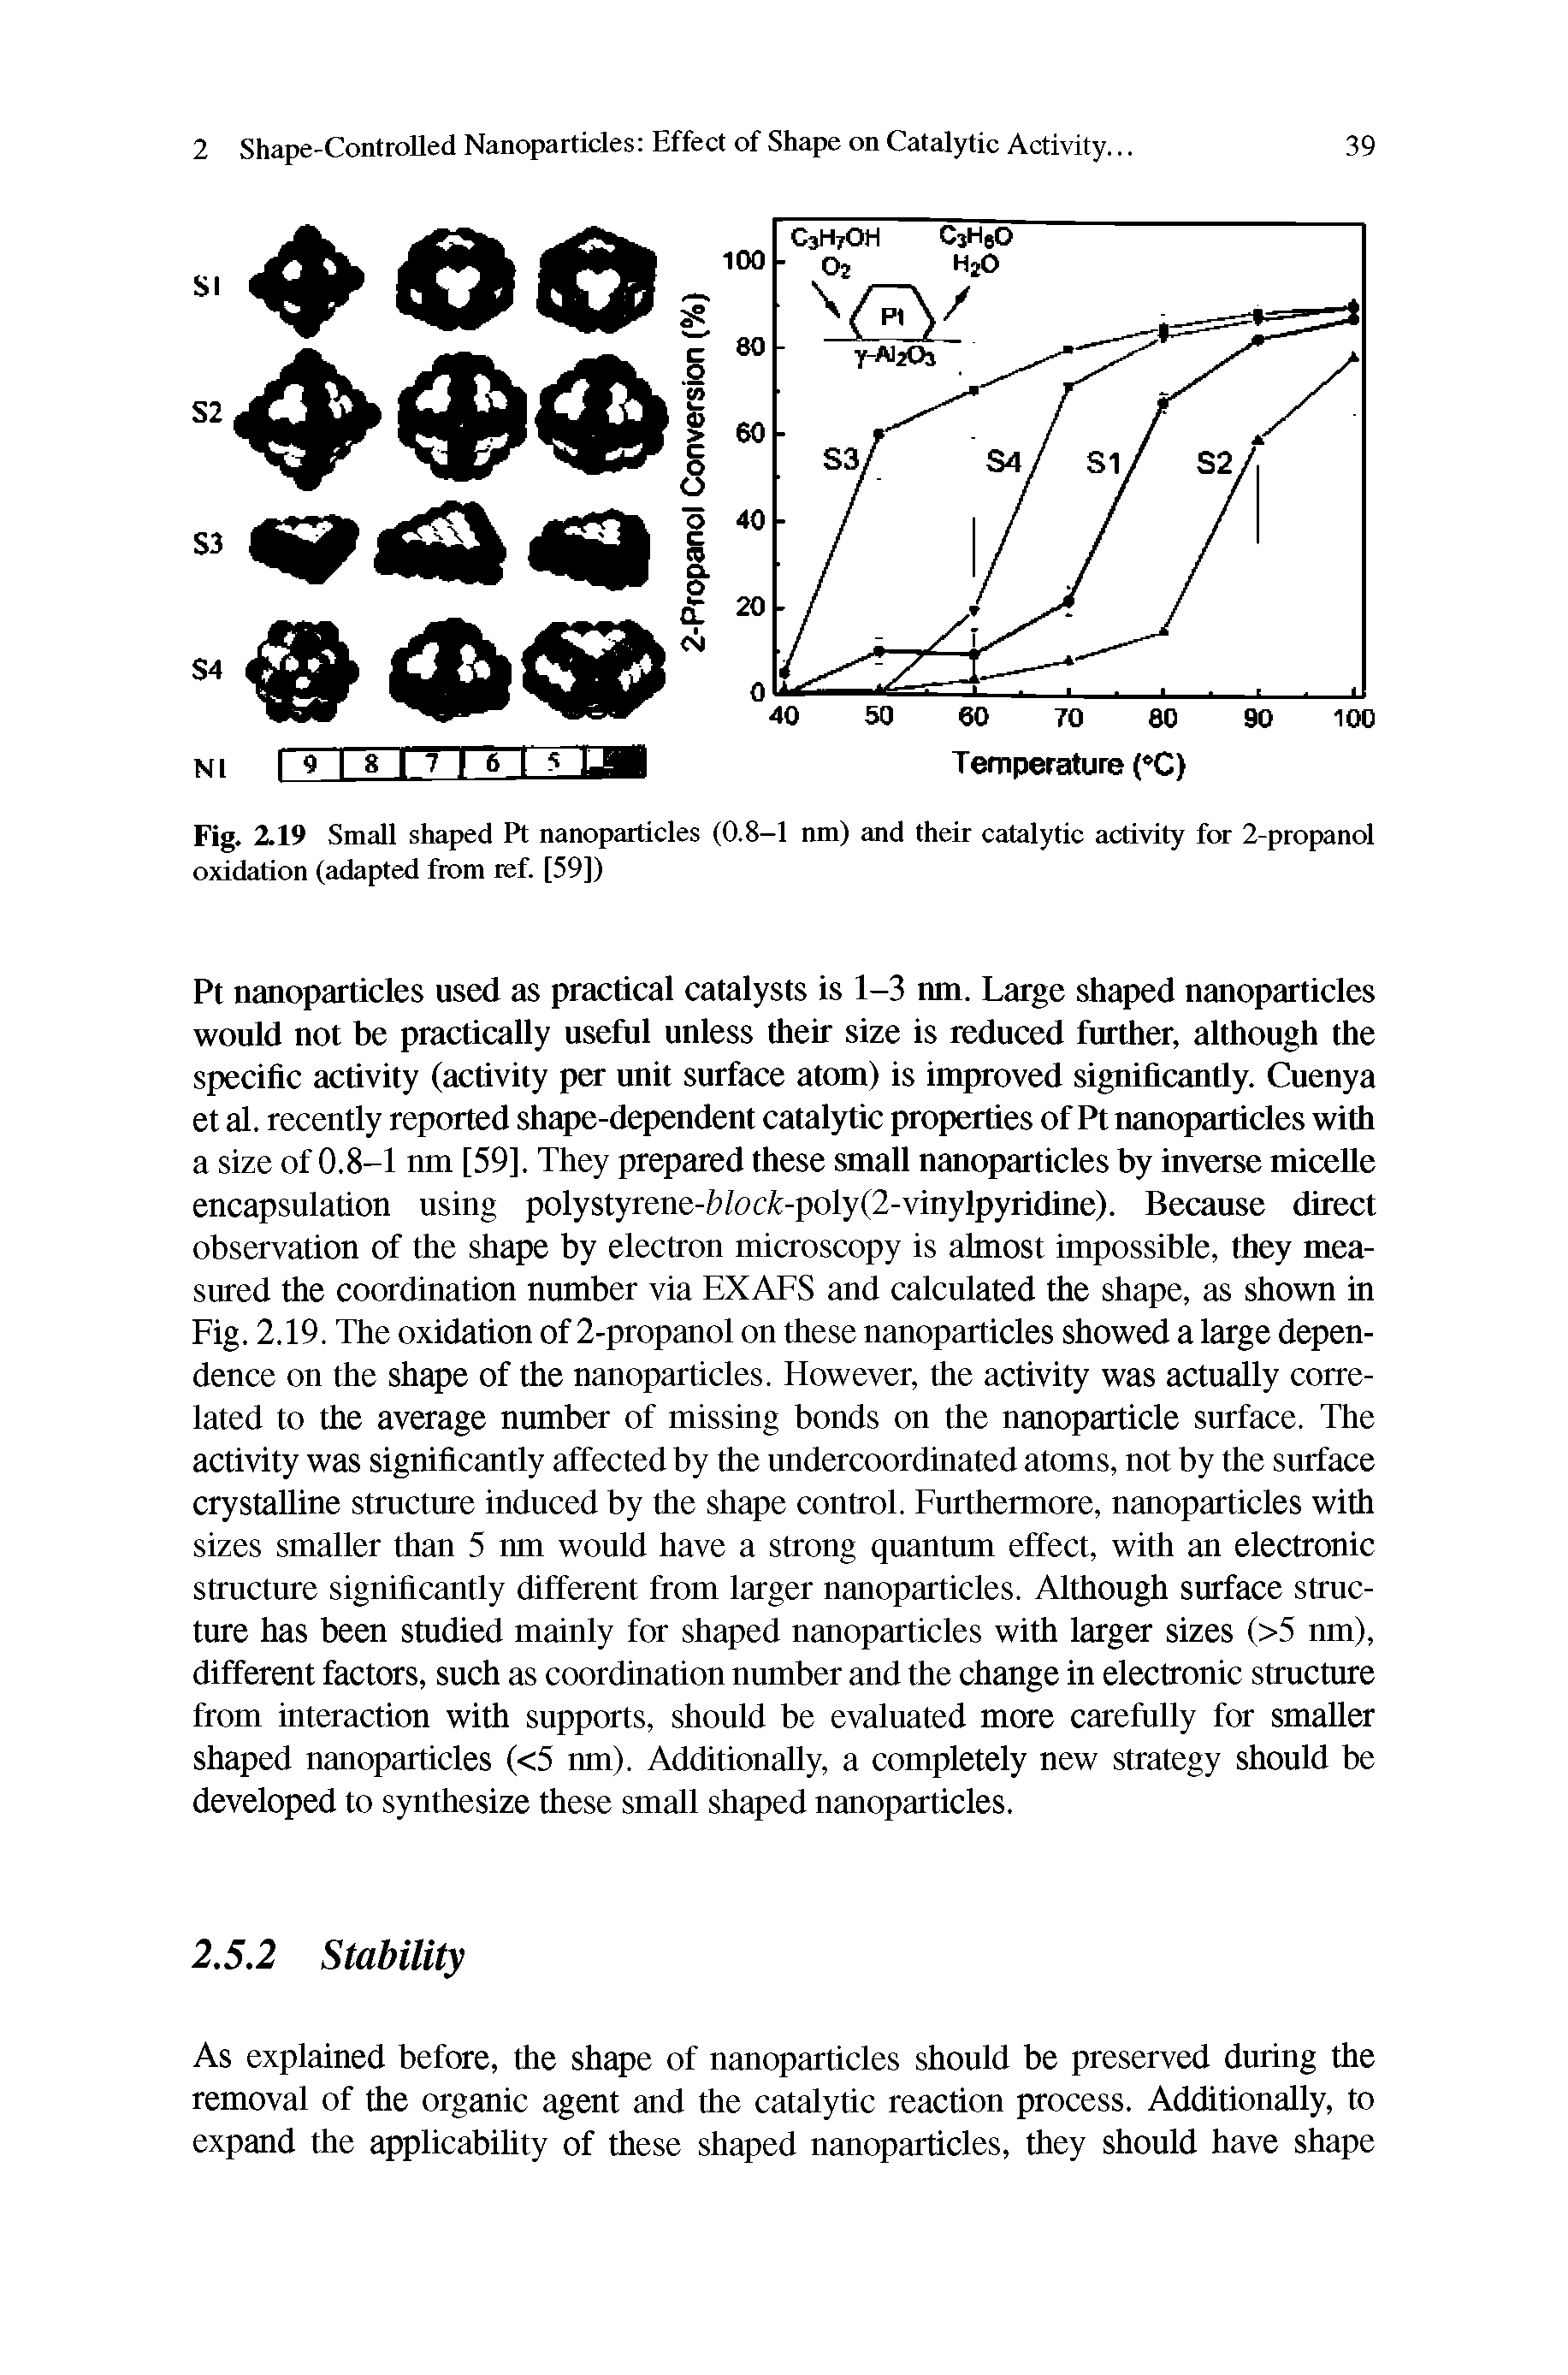 Fig. 2.19 Small shaped Pt nanoparticles (0.8-1 ran) and their catalytic activity for 2-propanol oxidation (adapted from ref. [59])...